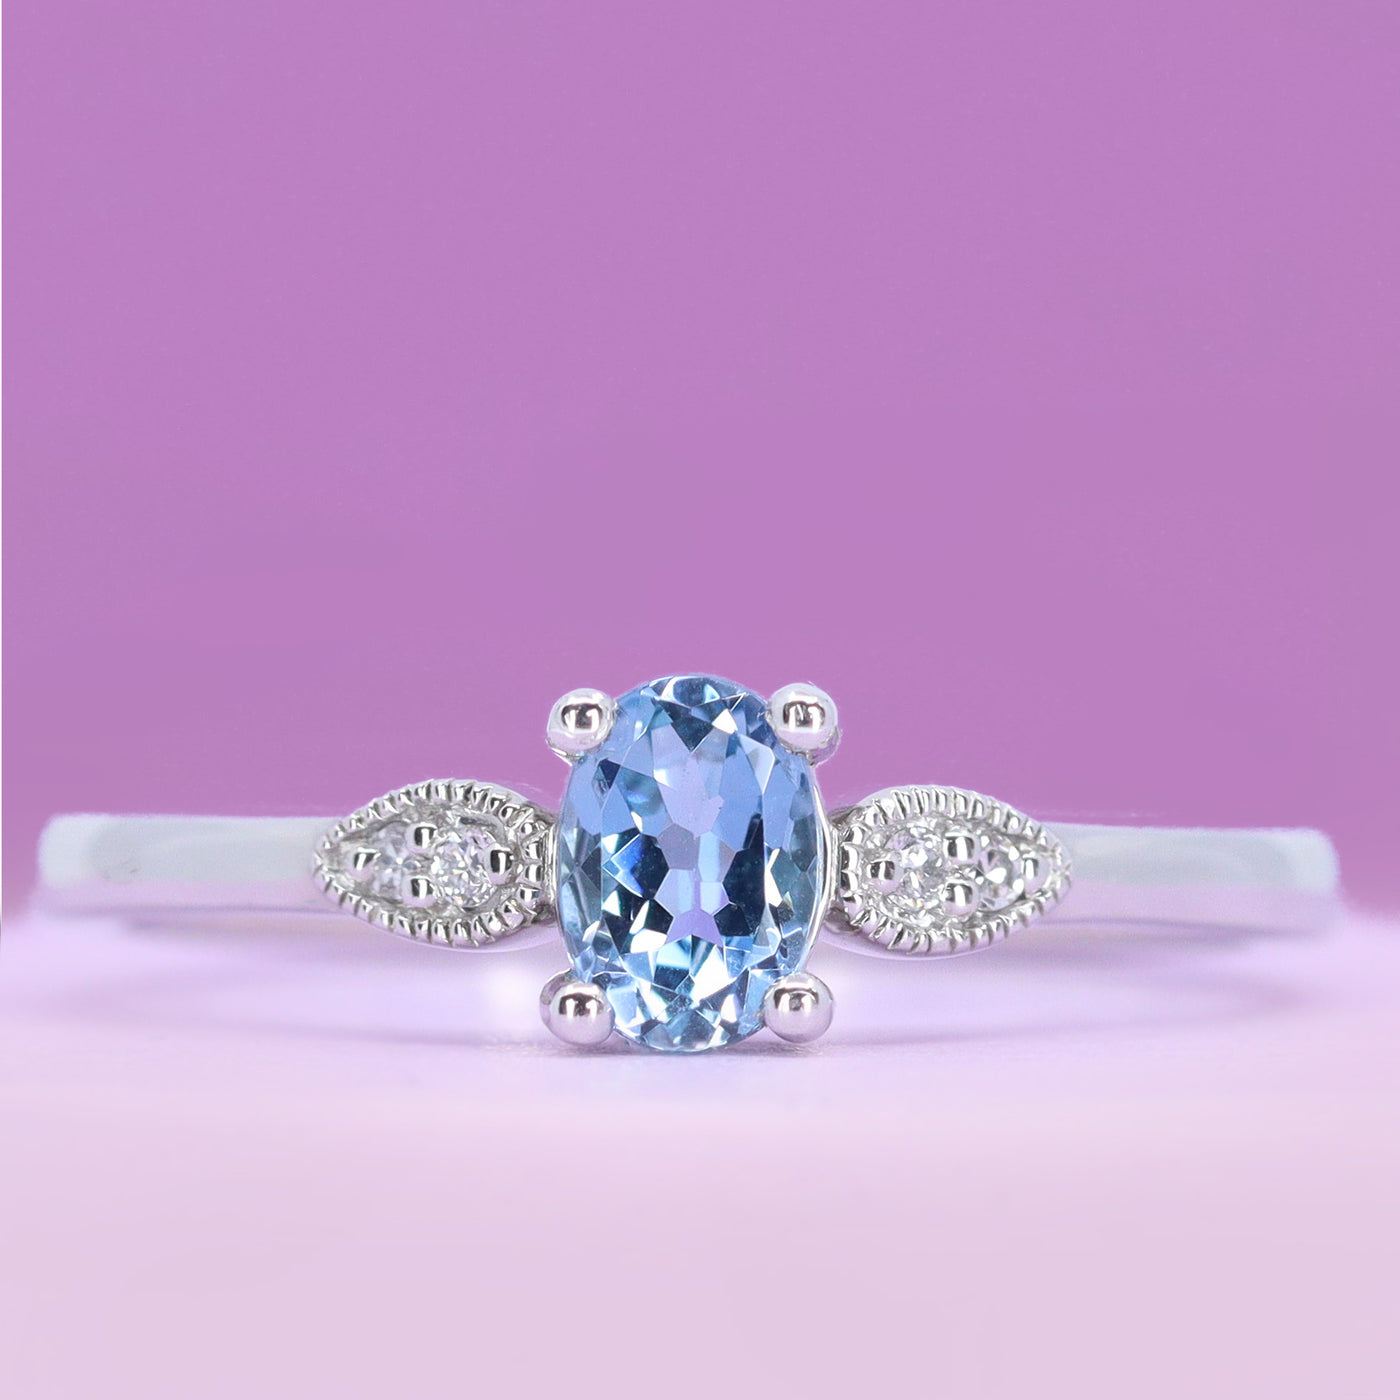 Rosa - Oval Cut Aquamarine Dainty Deco Trilogy Engagement Ring with Beaded Detail in Platinum - Ready-to-Wear